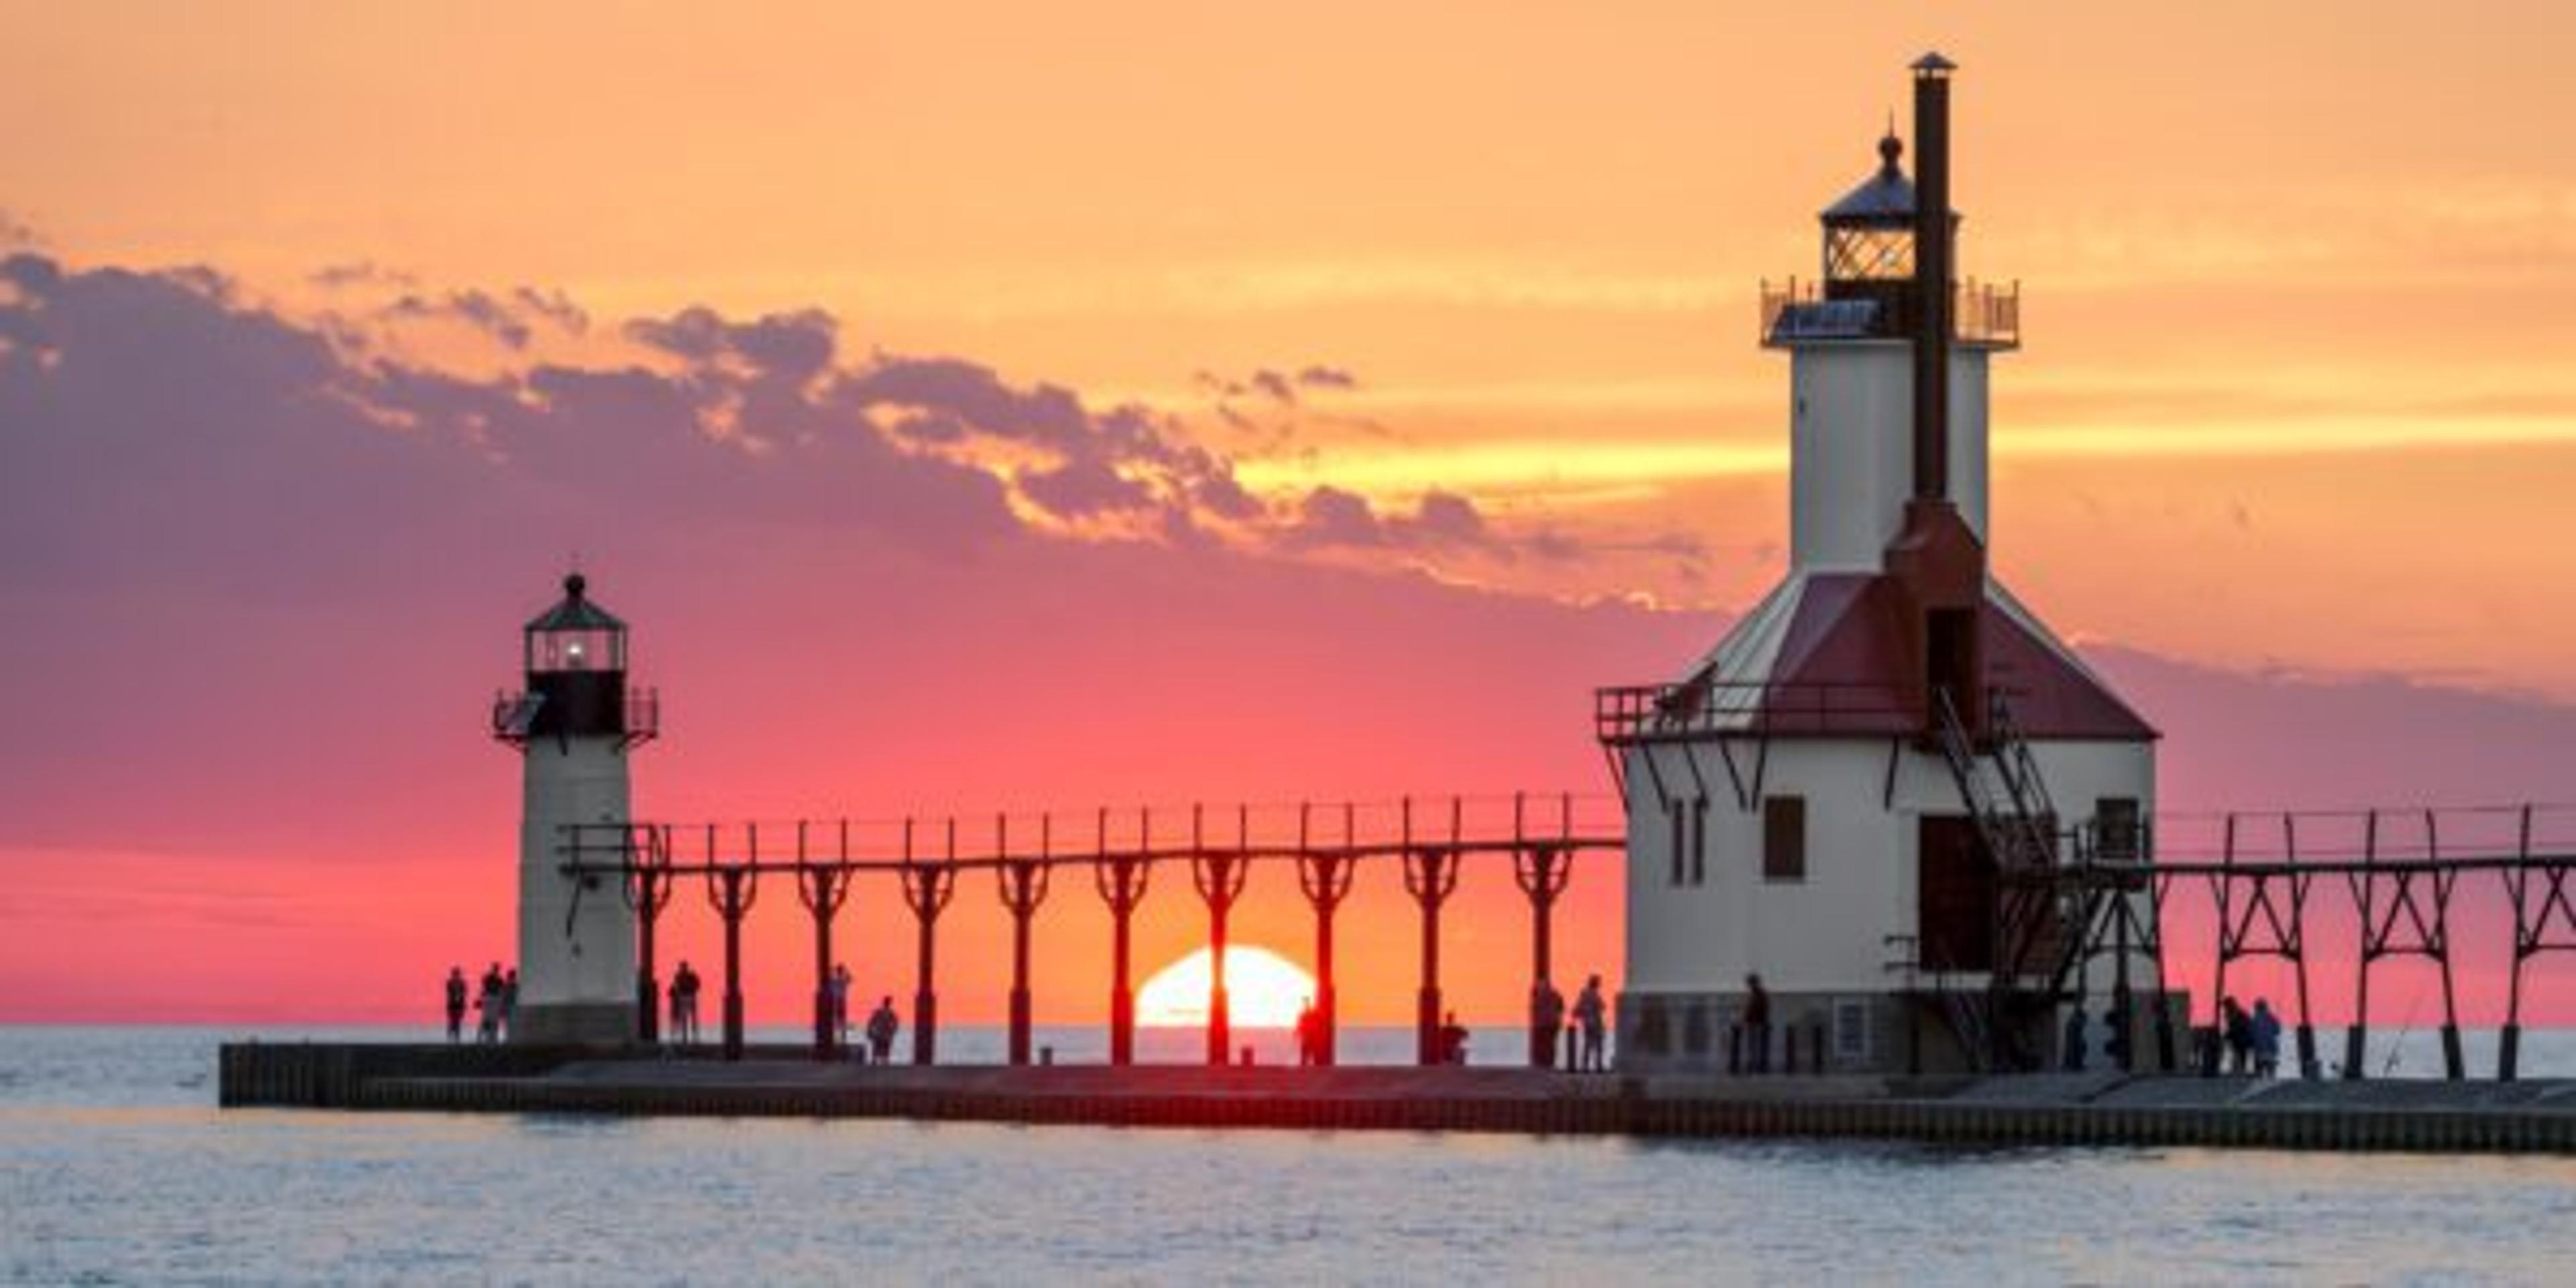 5 Things to Do in St Joseph This Summer